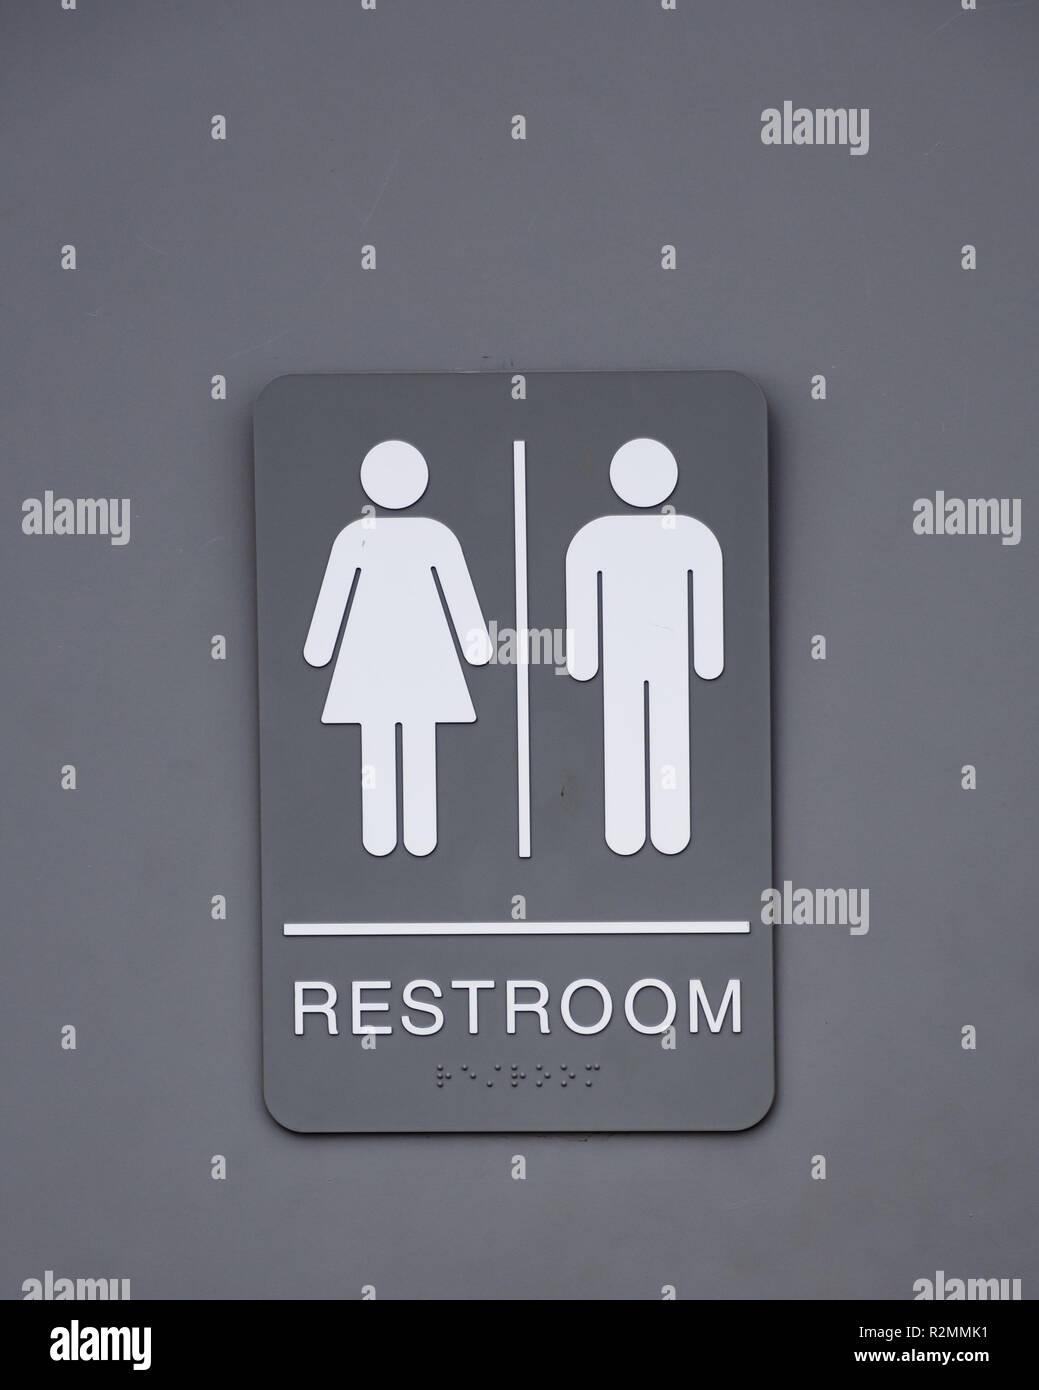 A gray and white unisex restroom sign on a bathroom door. Stock Photo